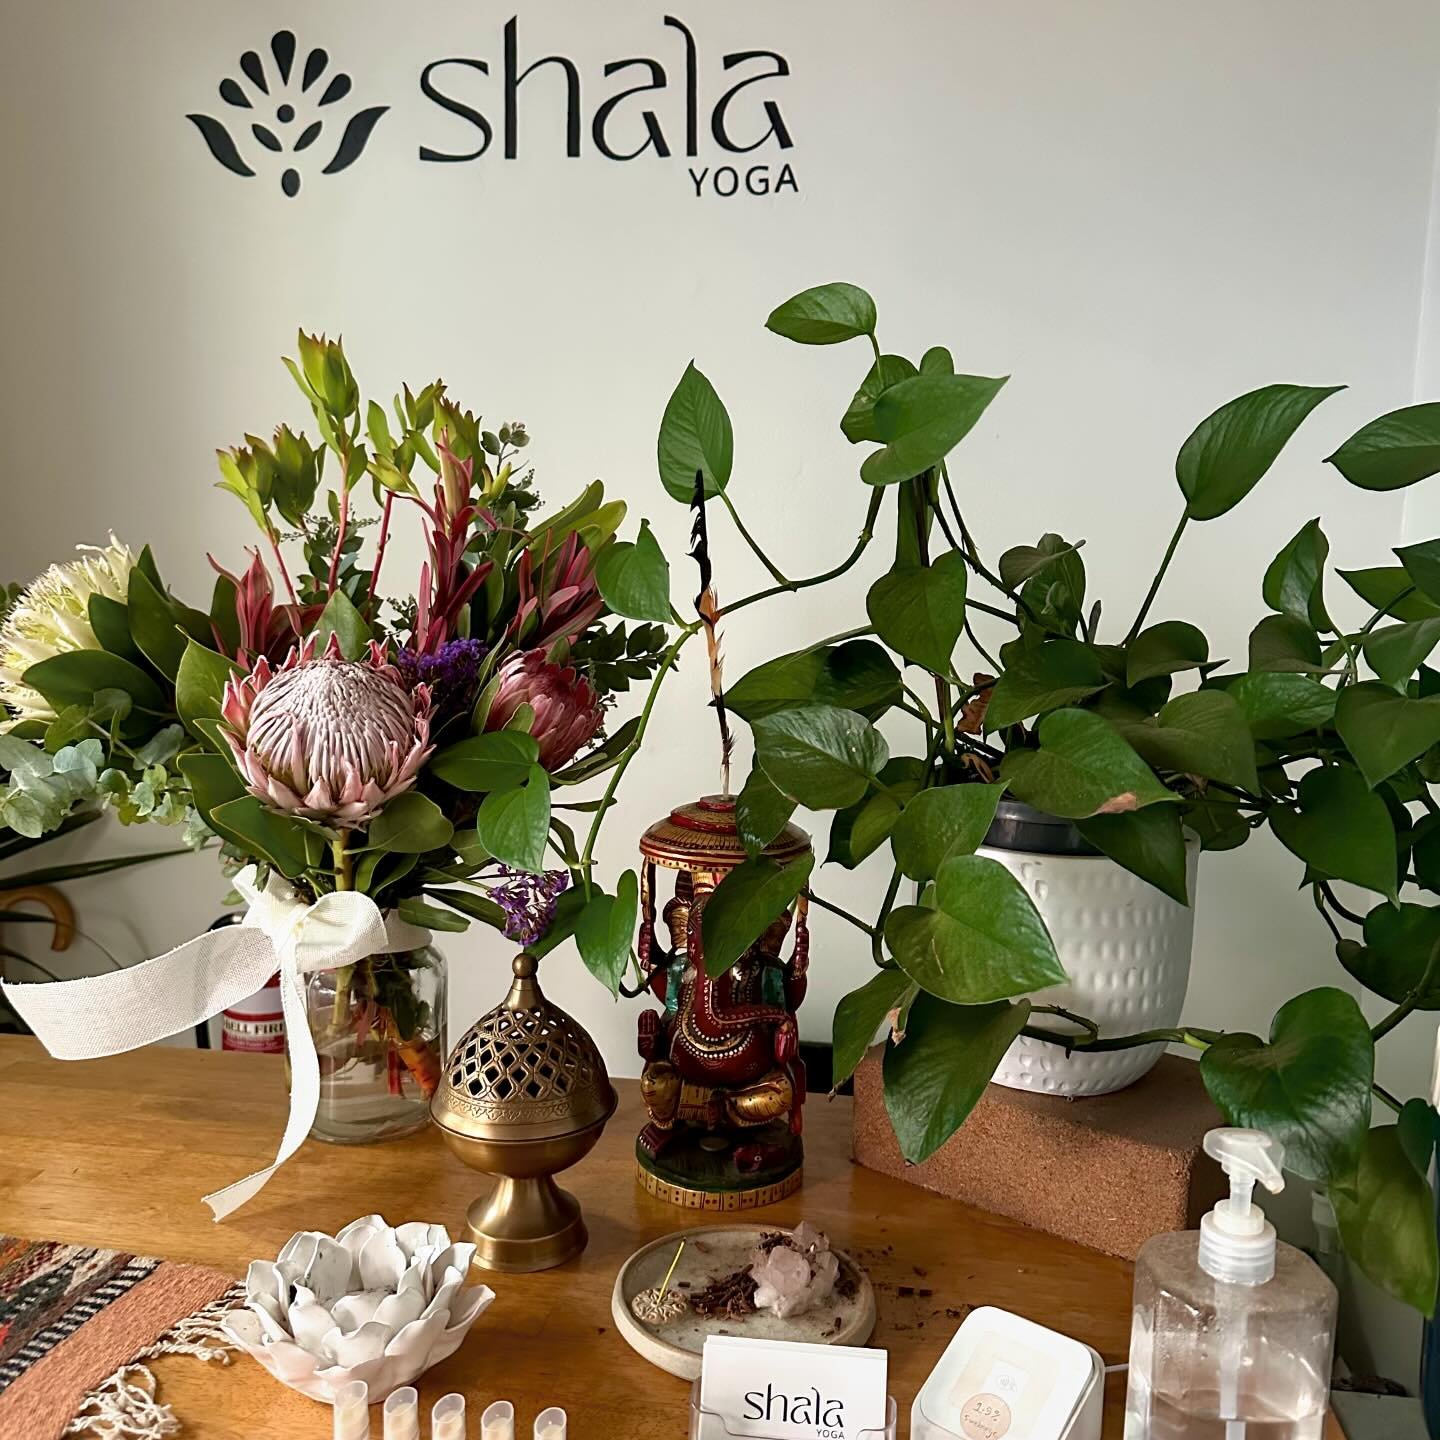 Shala is a place to call home. Make it your home with our Intro Offer for new students - 2 weeks of unlimited yoga for $50! 

See you in the Shala! ❤️

#seeyouintheshala #shalayoga #introoffer #yoga #startyourjourney #bunburyyoga #bunbury